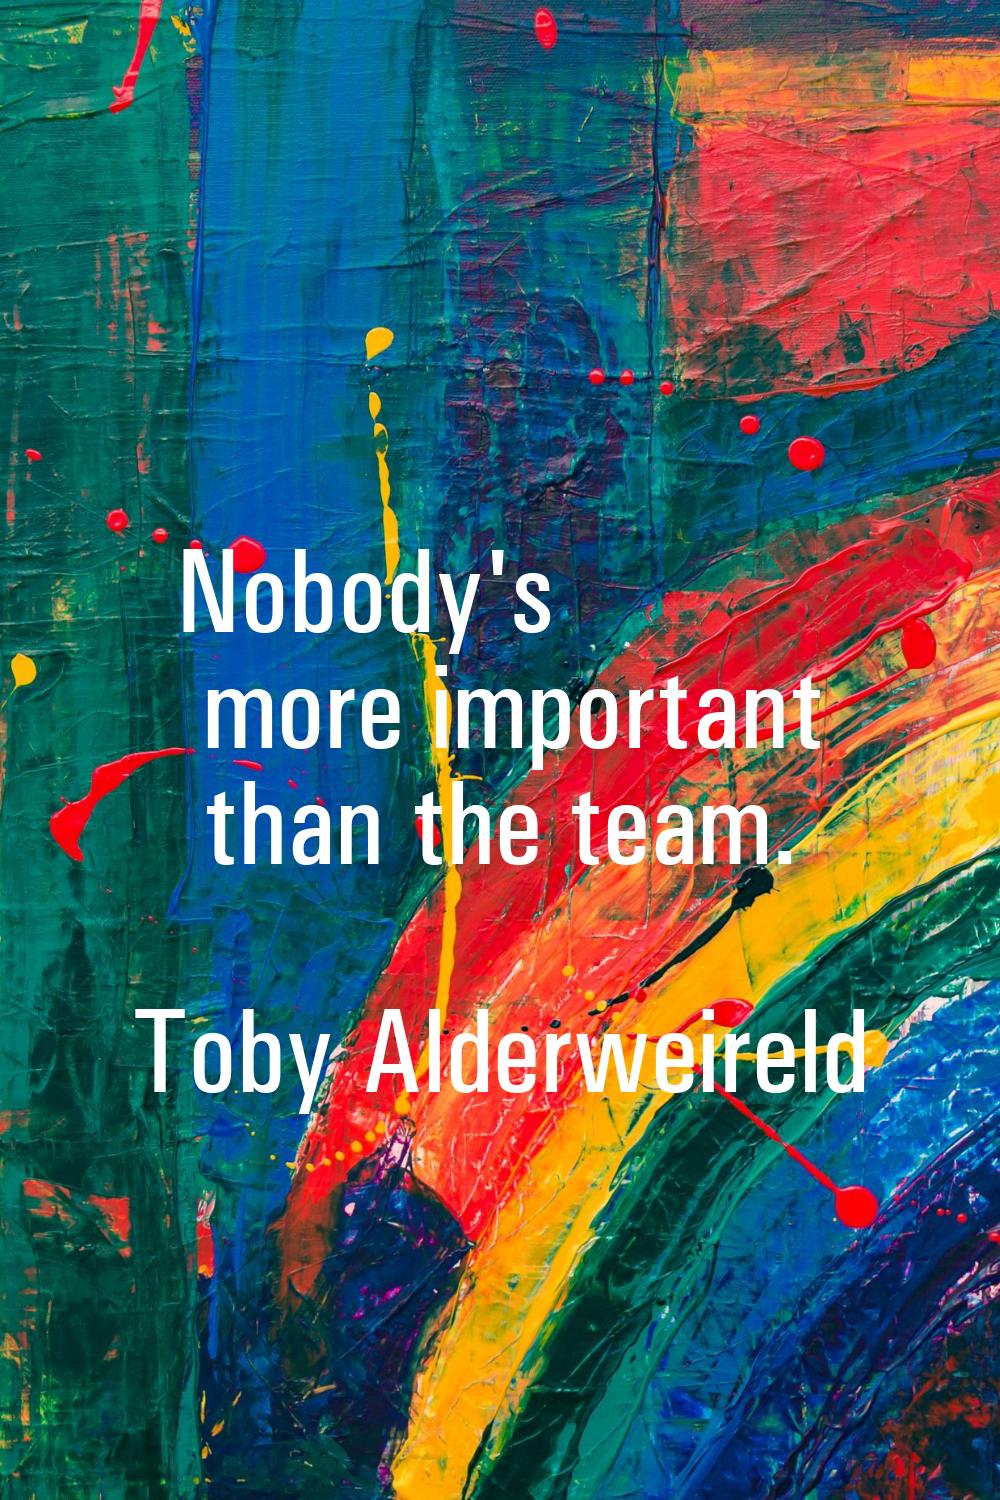 Nobody's more important than the team.